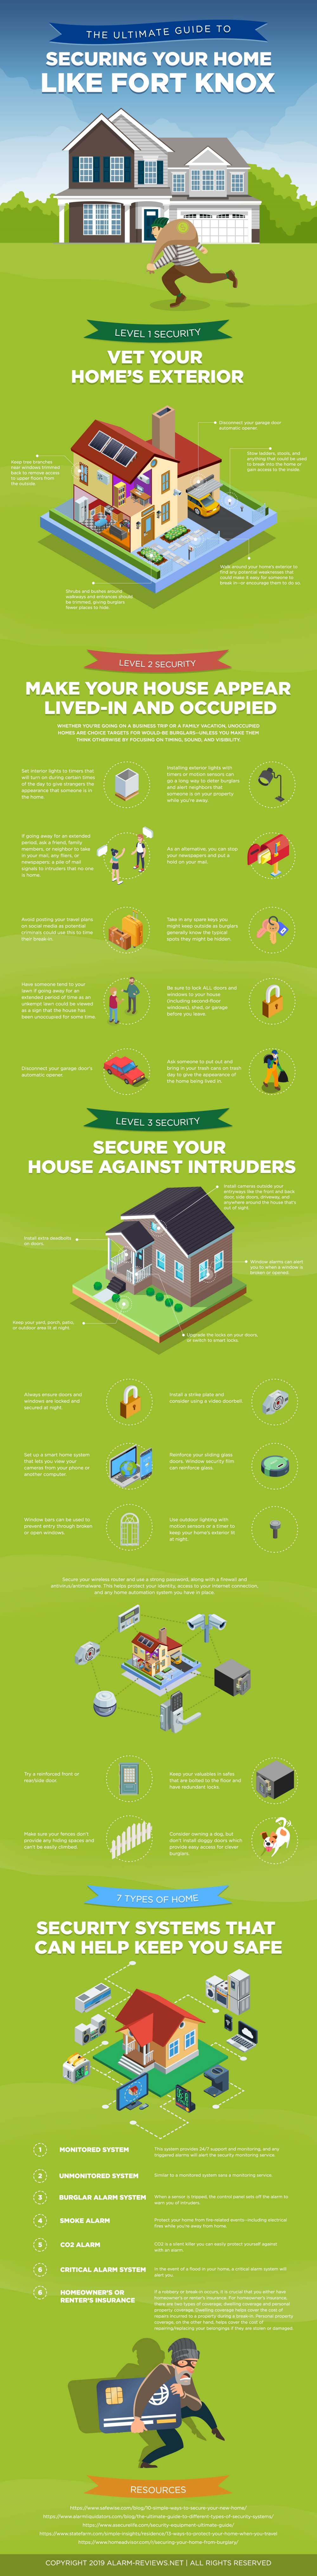 Guide to Securing Your Home like Fort Knox